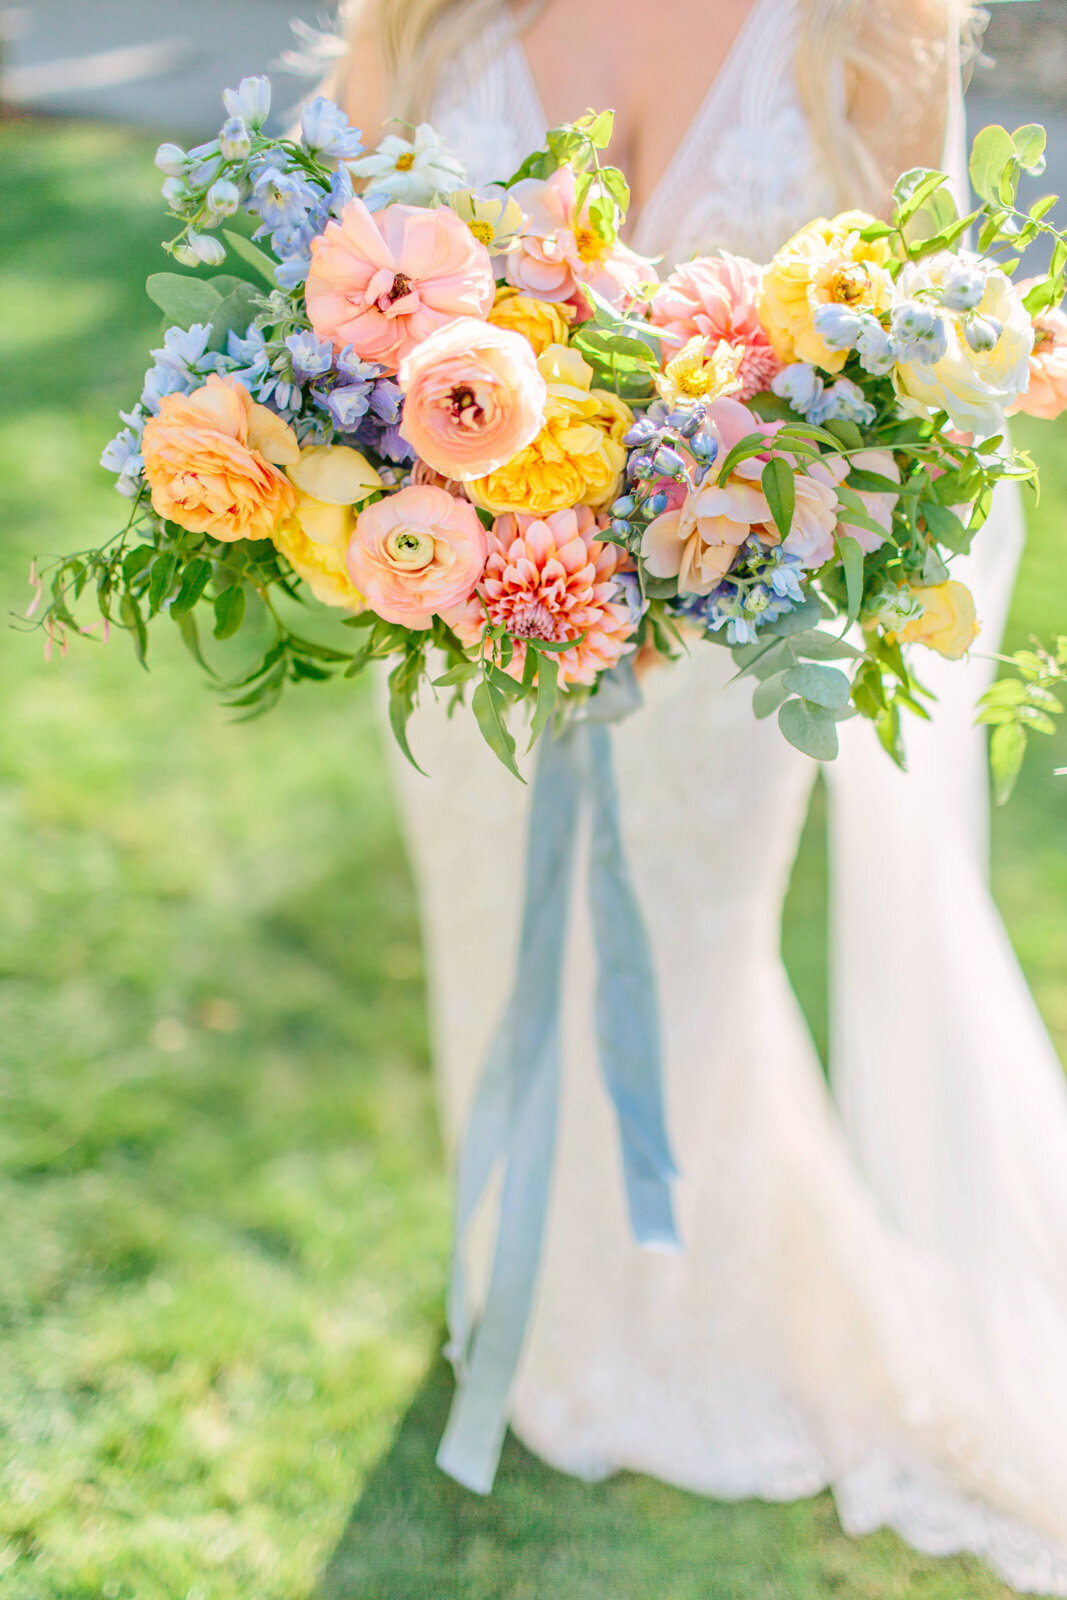 Kate-Murtaugh-Events-private-estate-tented-wedding-planner-blue-and-white-summer-floral-bouquet